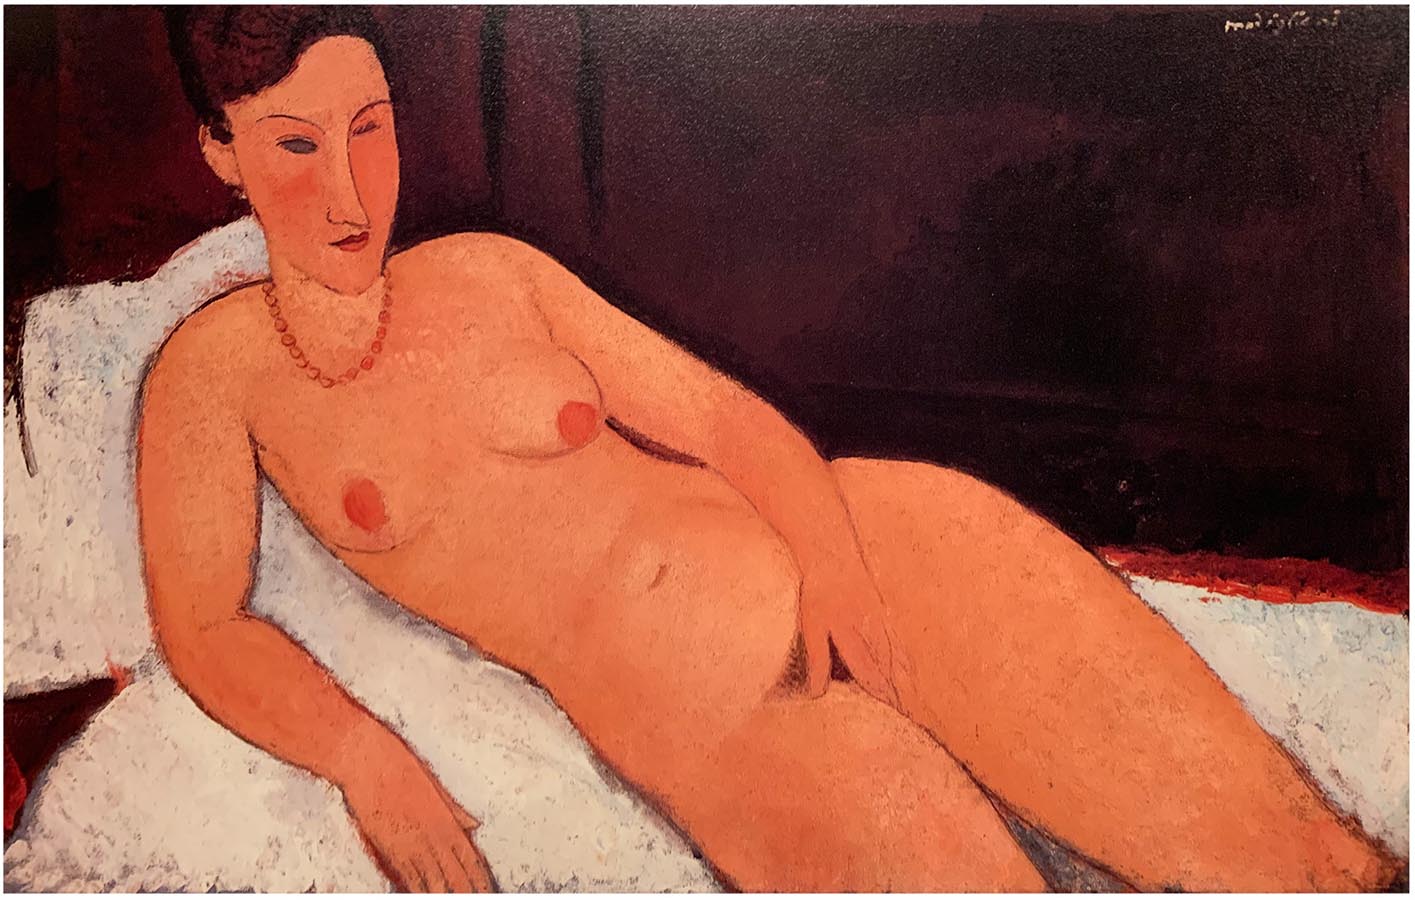 NUDE WITH CORAL NECKLACE - ONE EYE CLOSED  BY AMEDEO MODIGLIANI